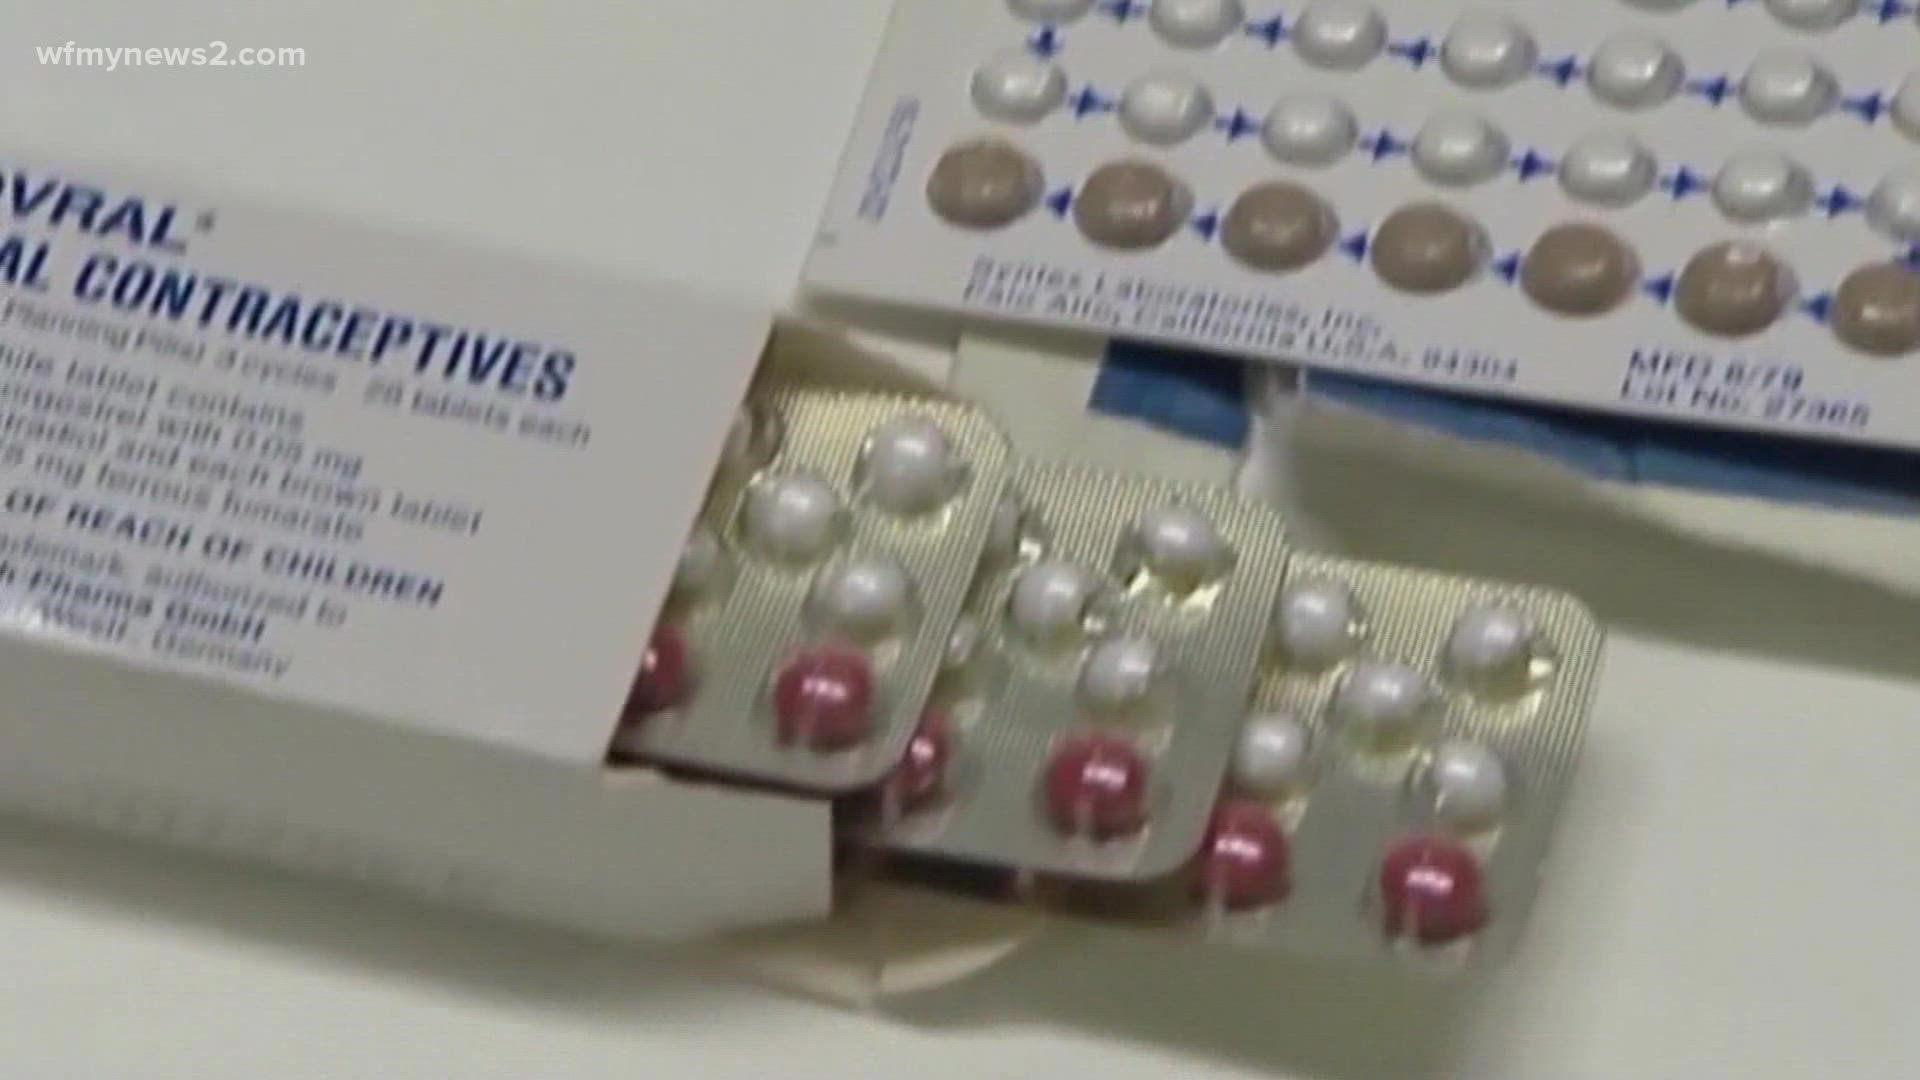 Here in North Carolina, a new law makes getting birth control more accessible.